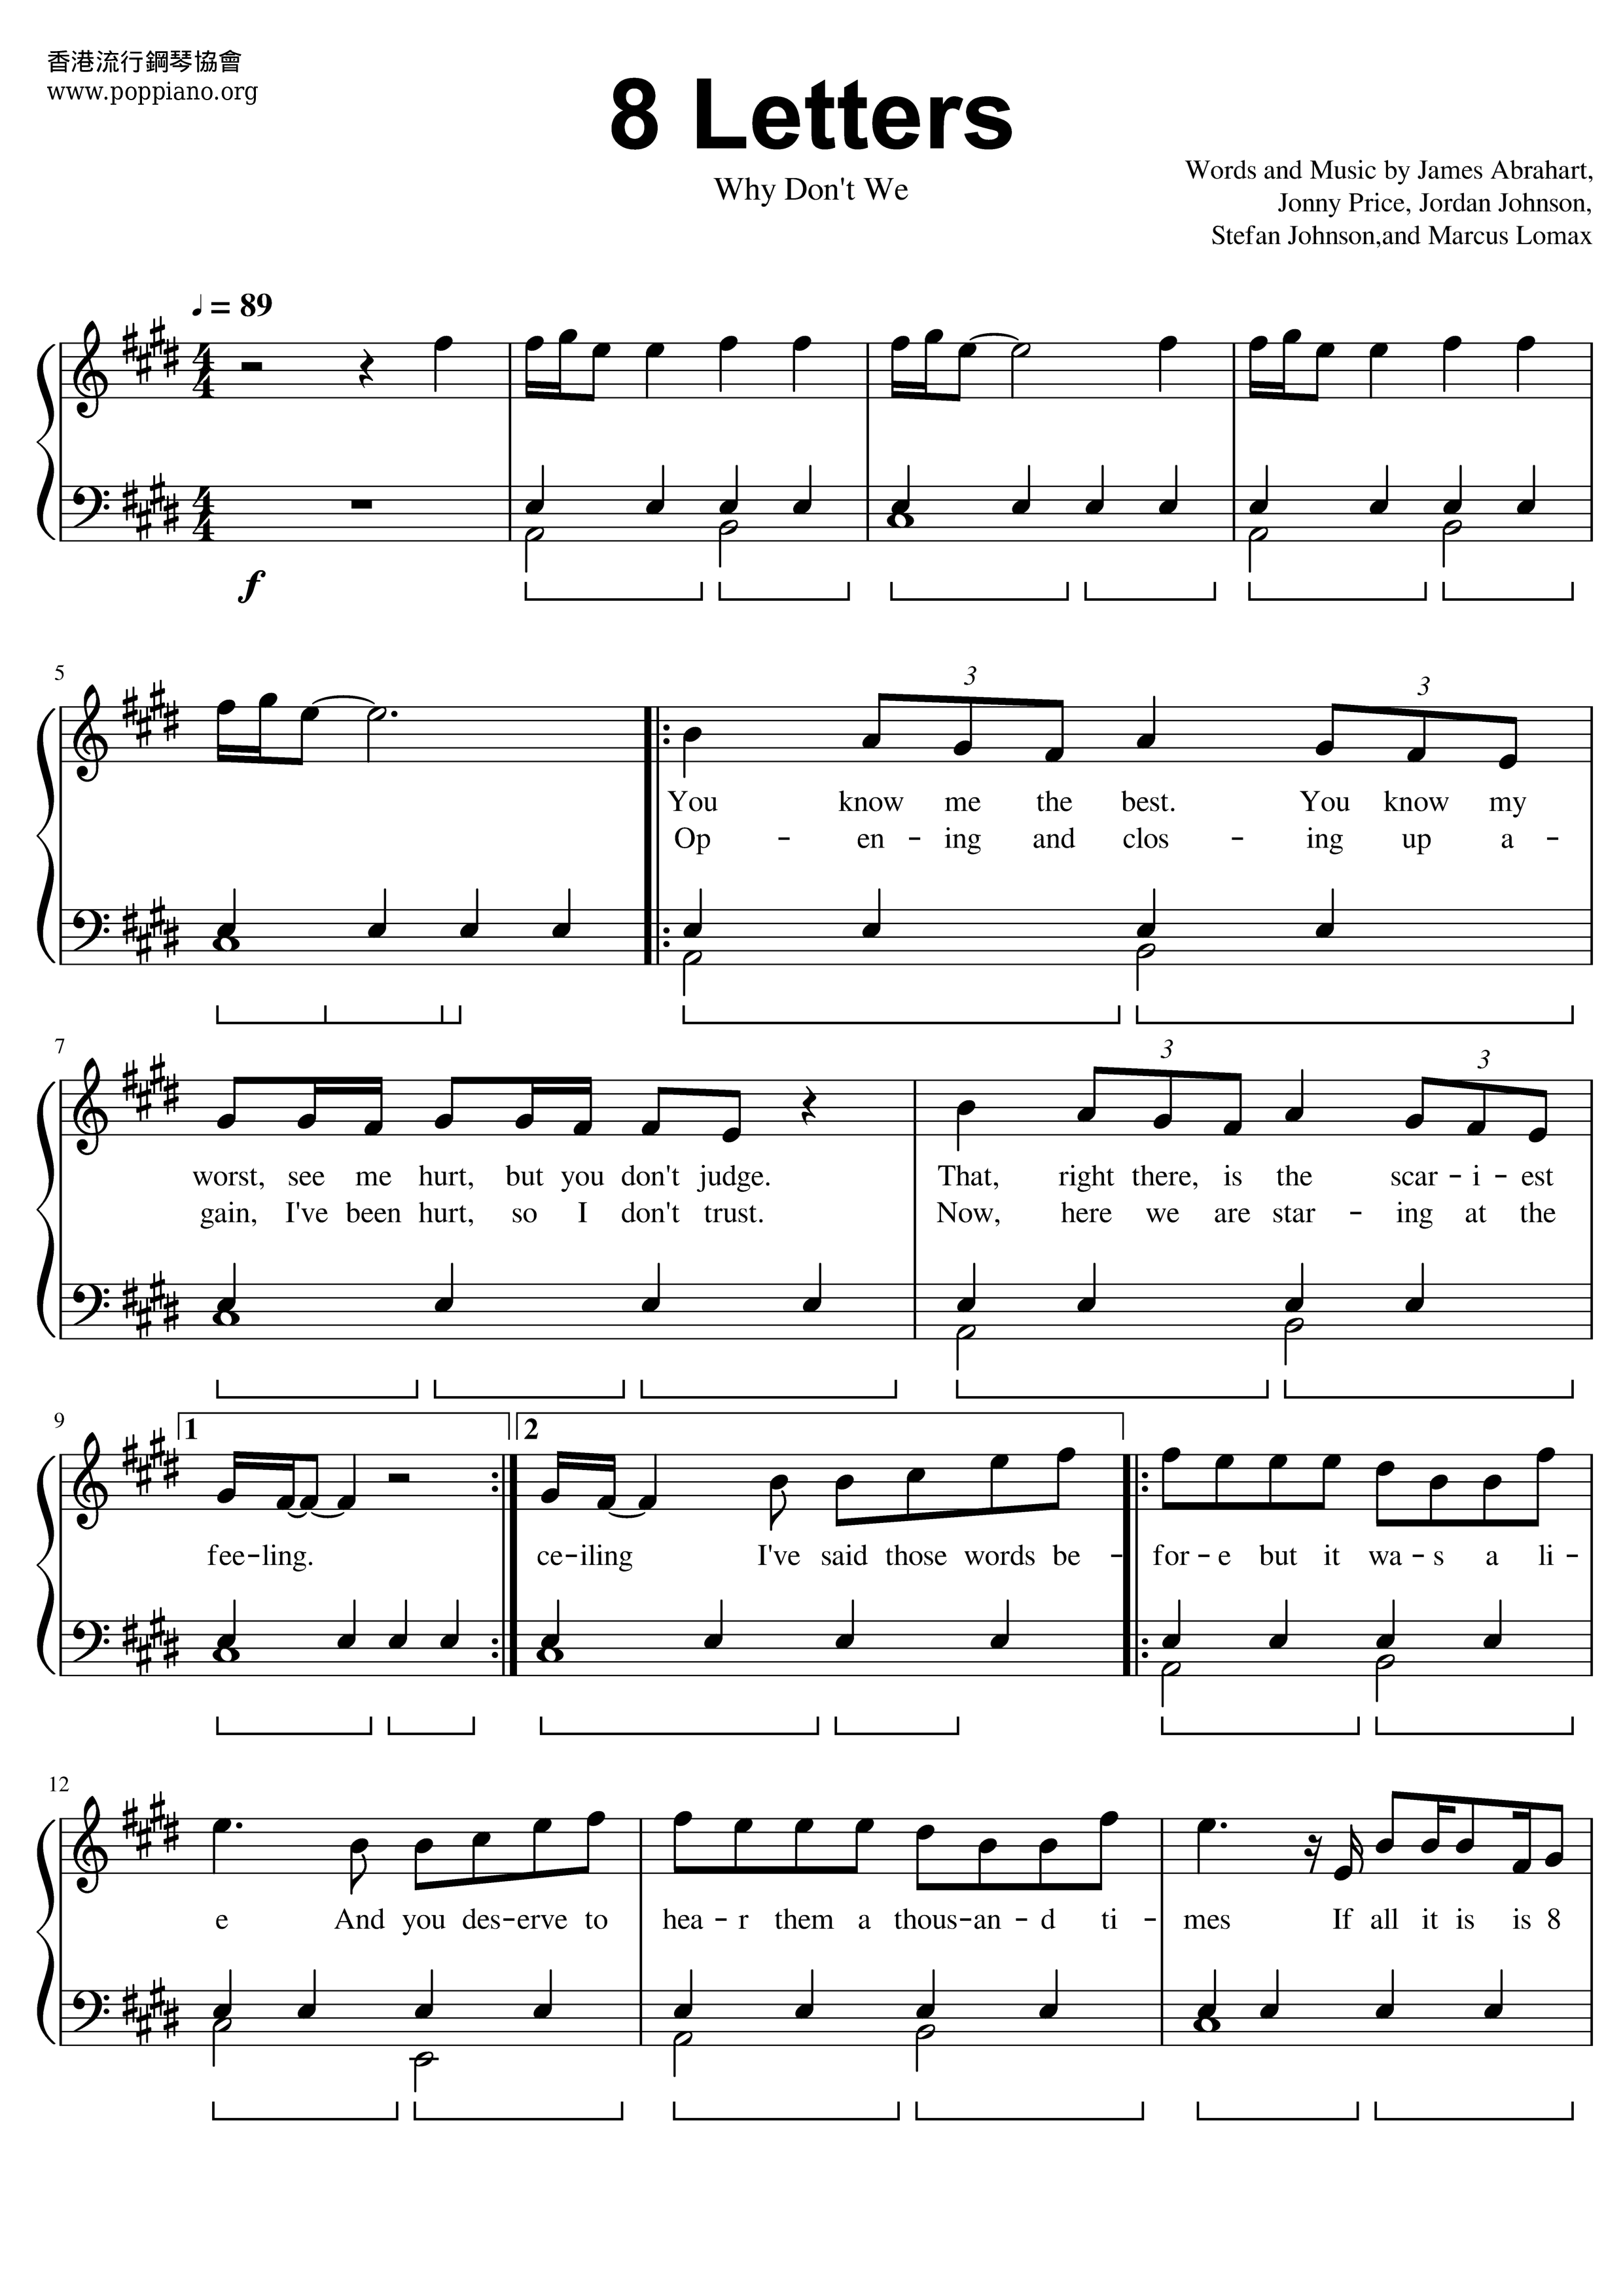 Consultar ballena azul mando ☆ Why Don't We-8 Letters Sheet Music pdf, - Free Score Download ☆